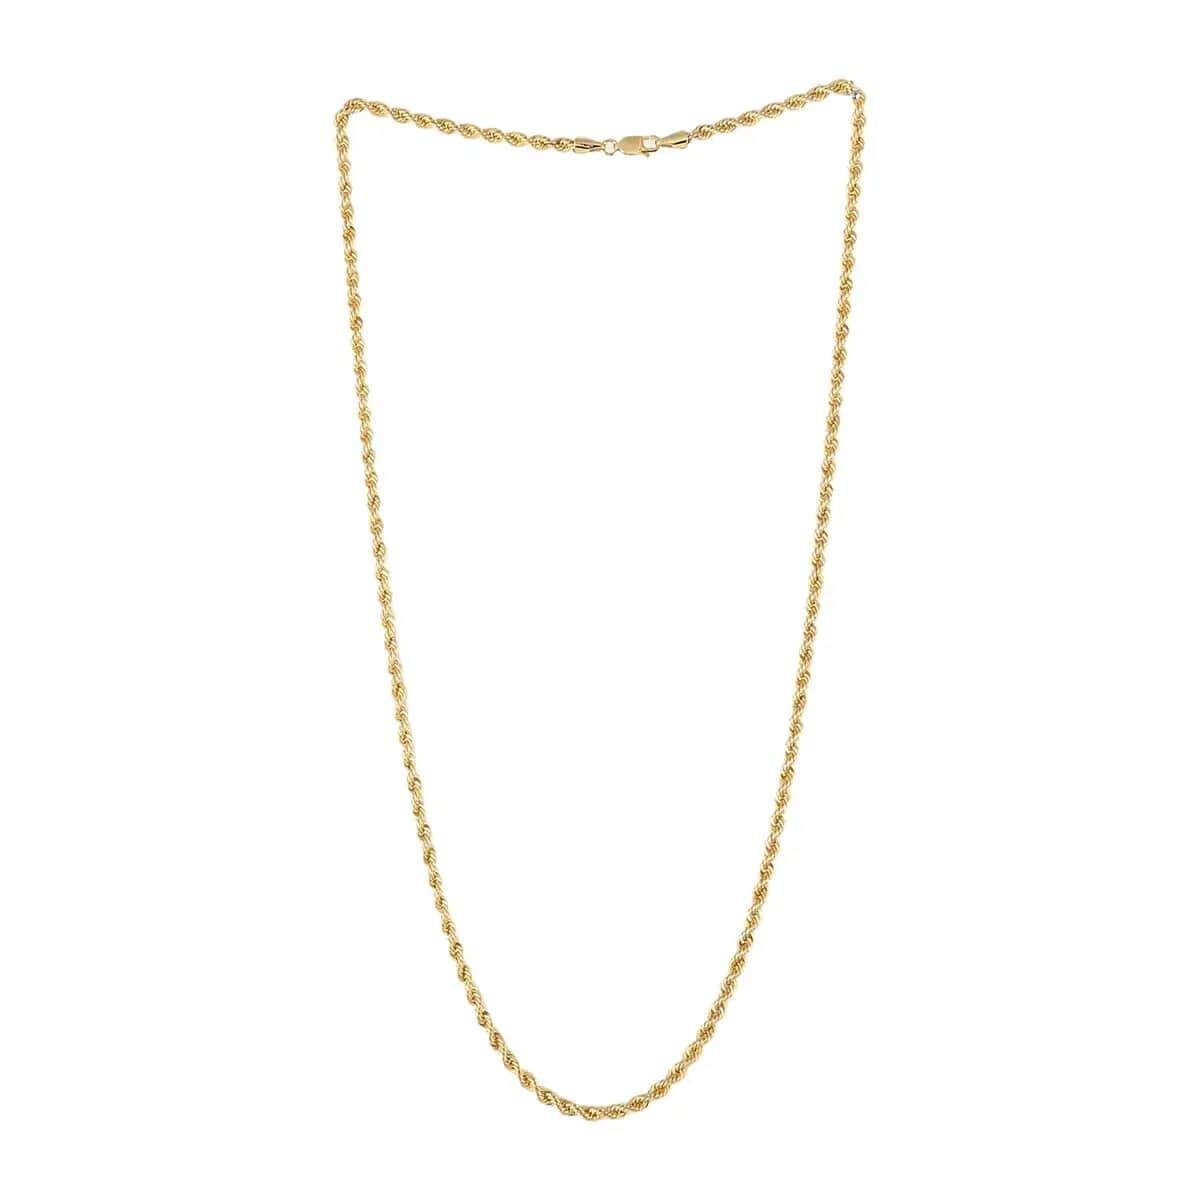 10K Yellow Gold Rope Chain Necklace, 20 Inch Necklace, Gold Jewelry 1.5mm 1.4 Grams image number 5